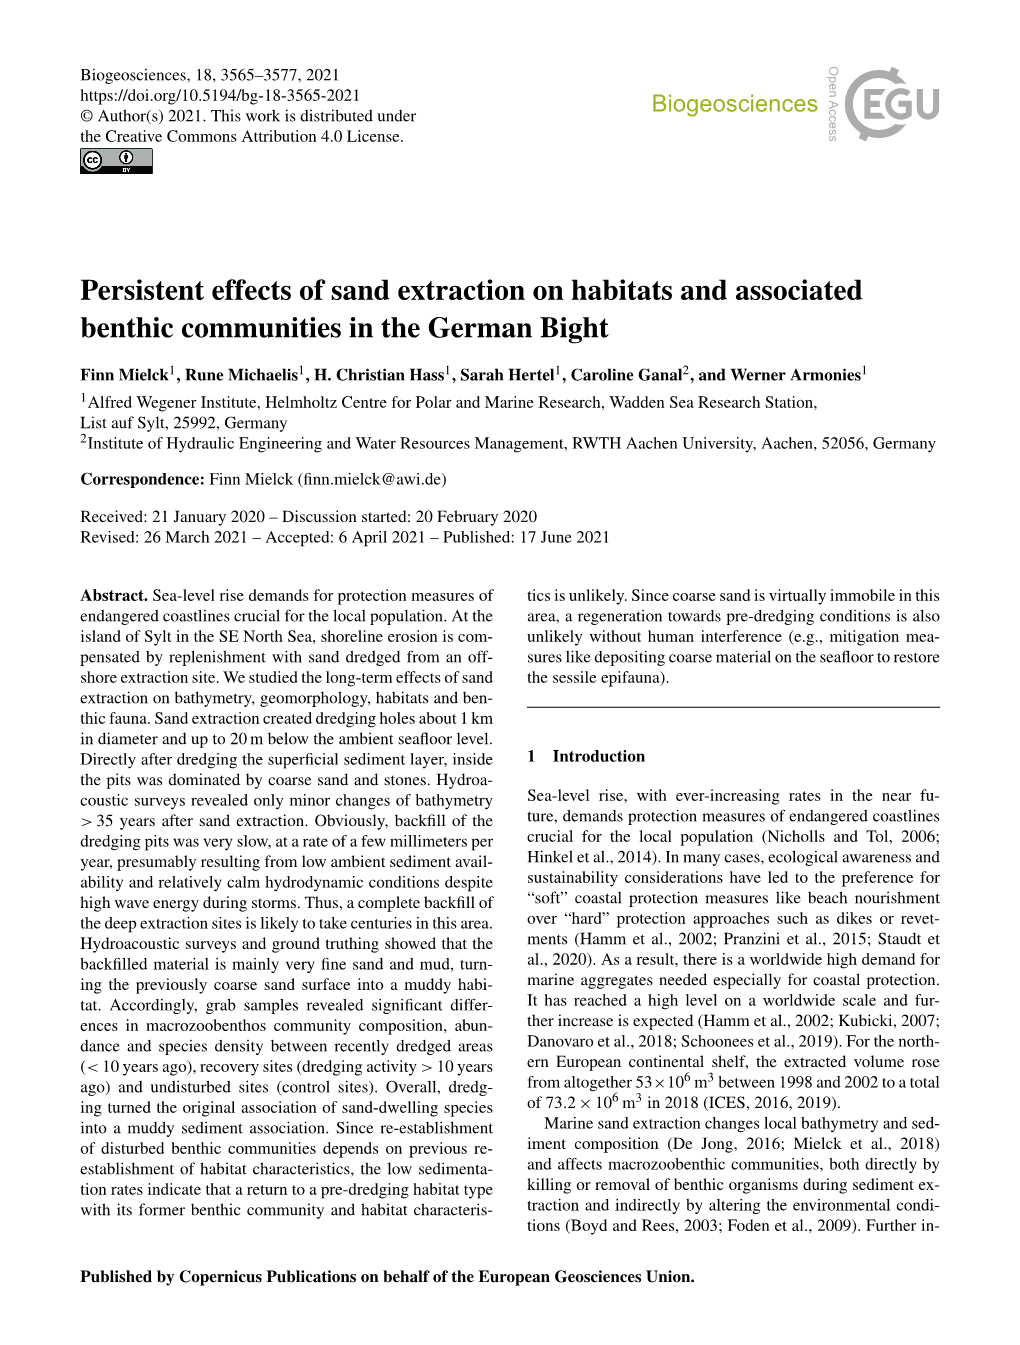 Persistent Effects of Sand Extraction on Habitats and Associated Benthic Communities in the German Bight